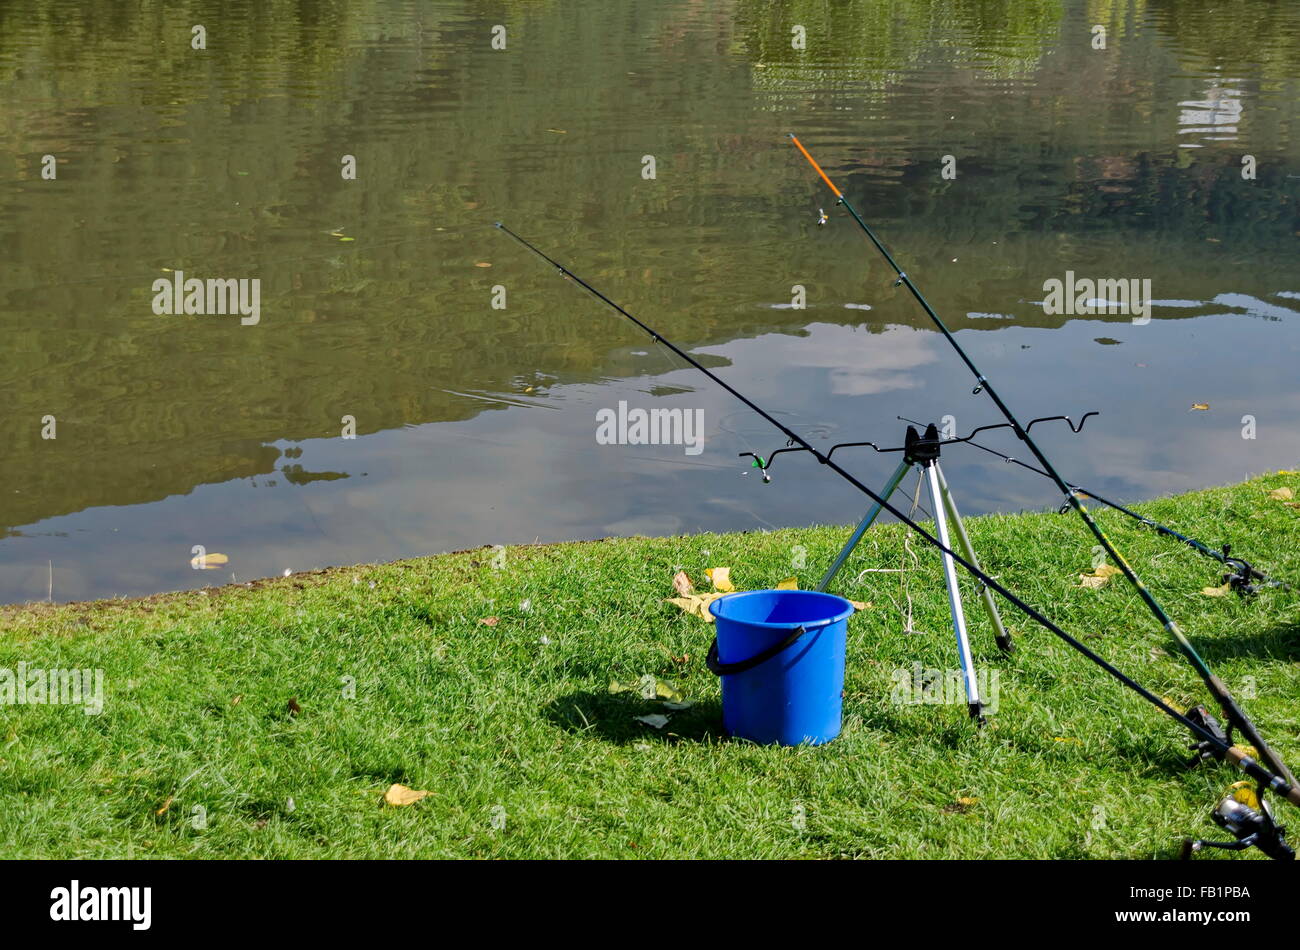 Carp Stand with Two Fishing Rods Stock Image - Image of nature, male:  177425257, carp stand